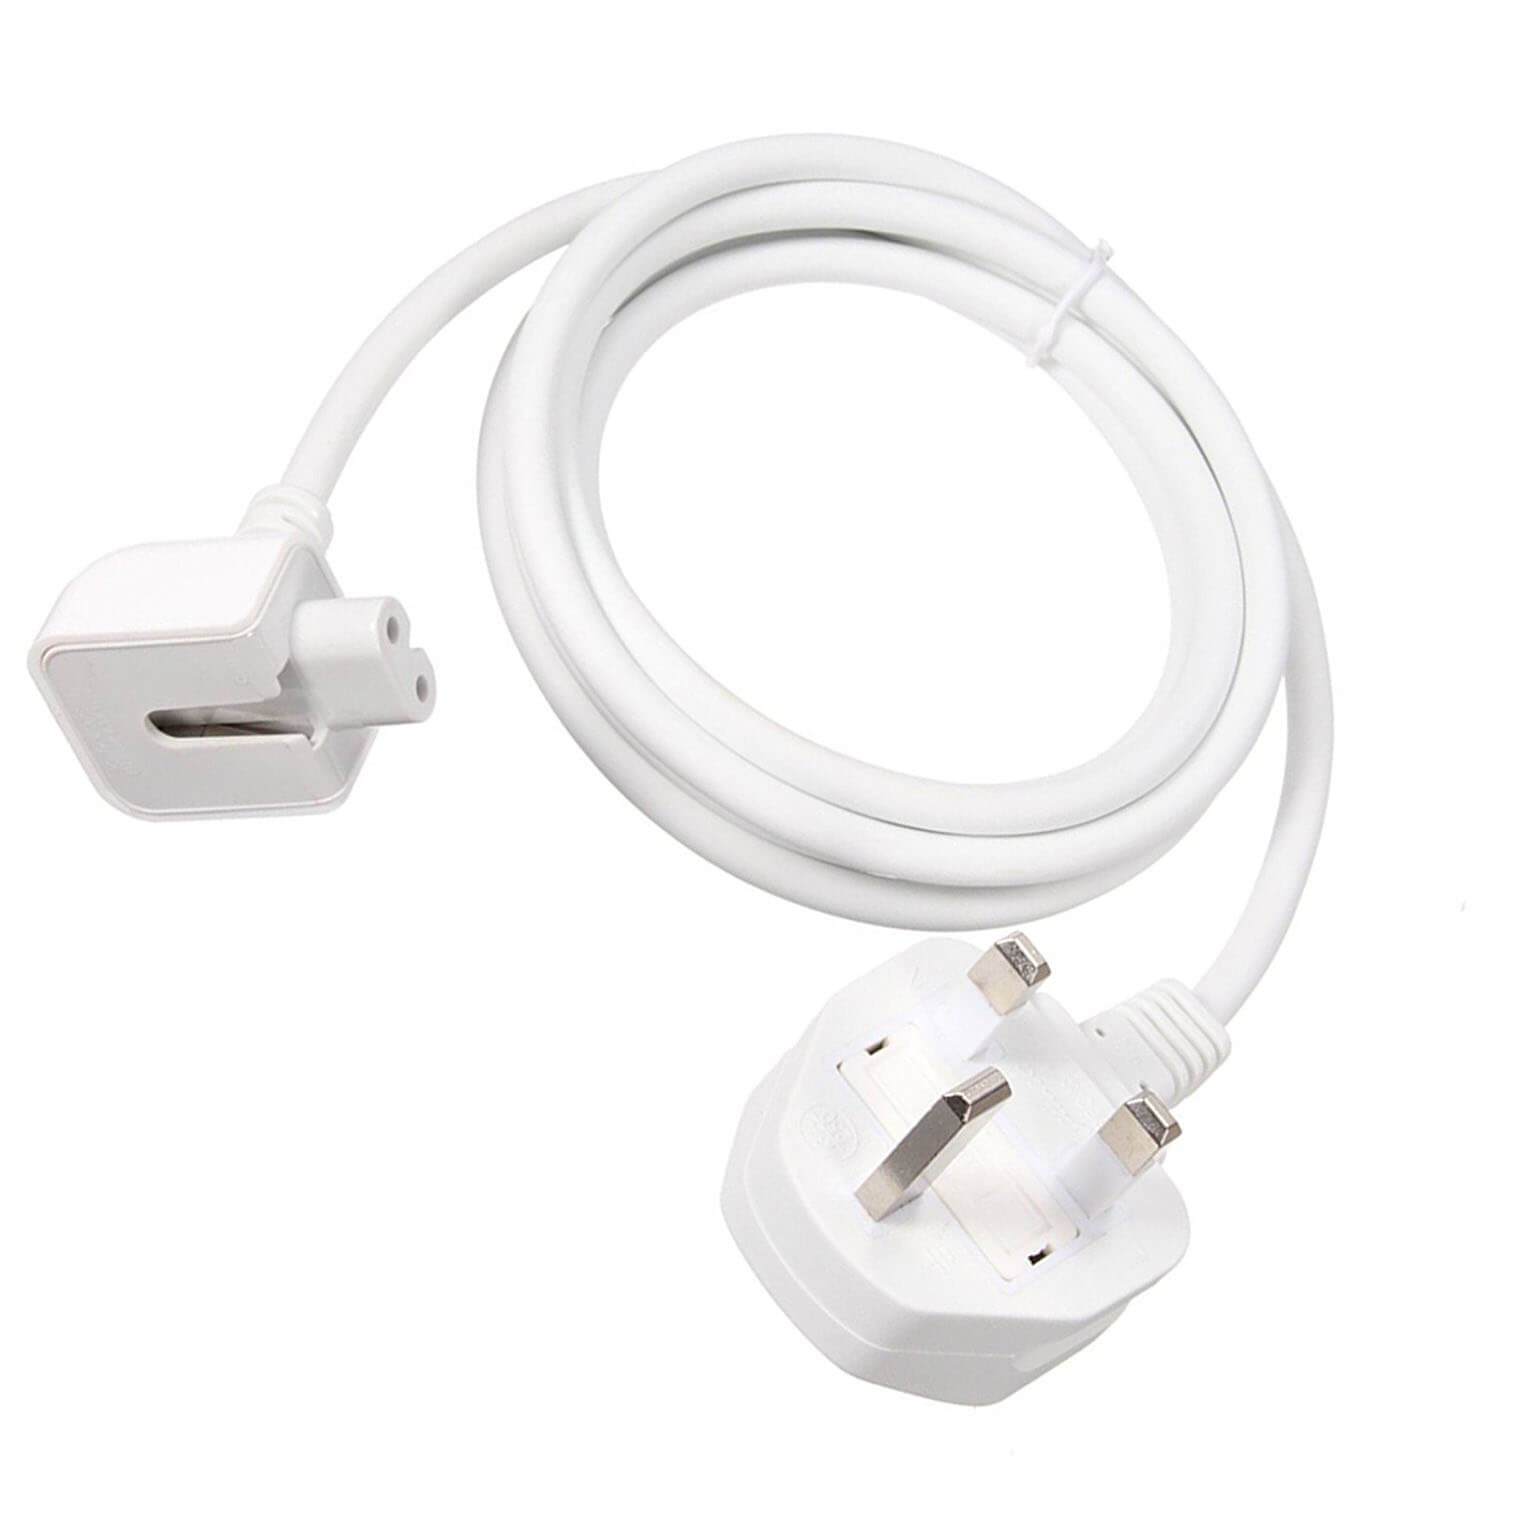 Replacement UK Wall Plug Extension Power Cable Cord For MacBook Magsafe Adapters